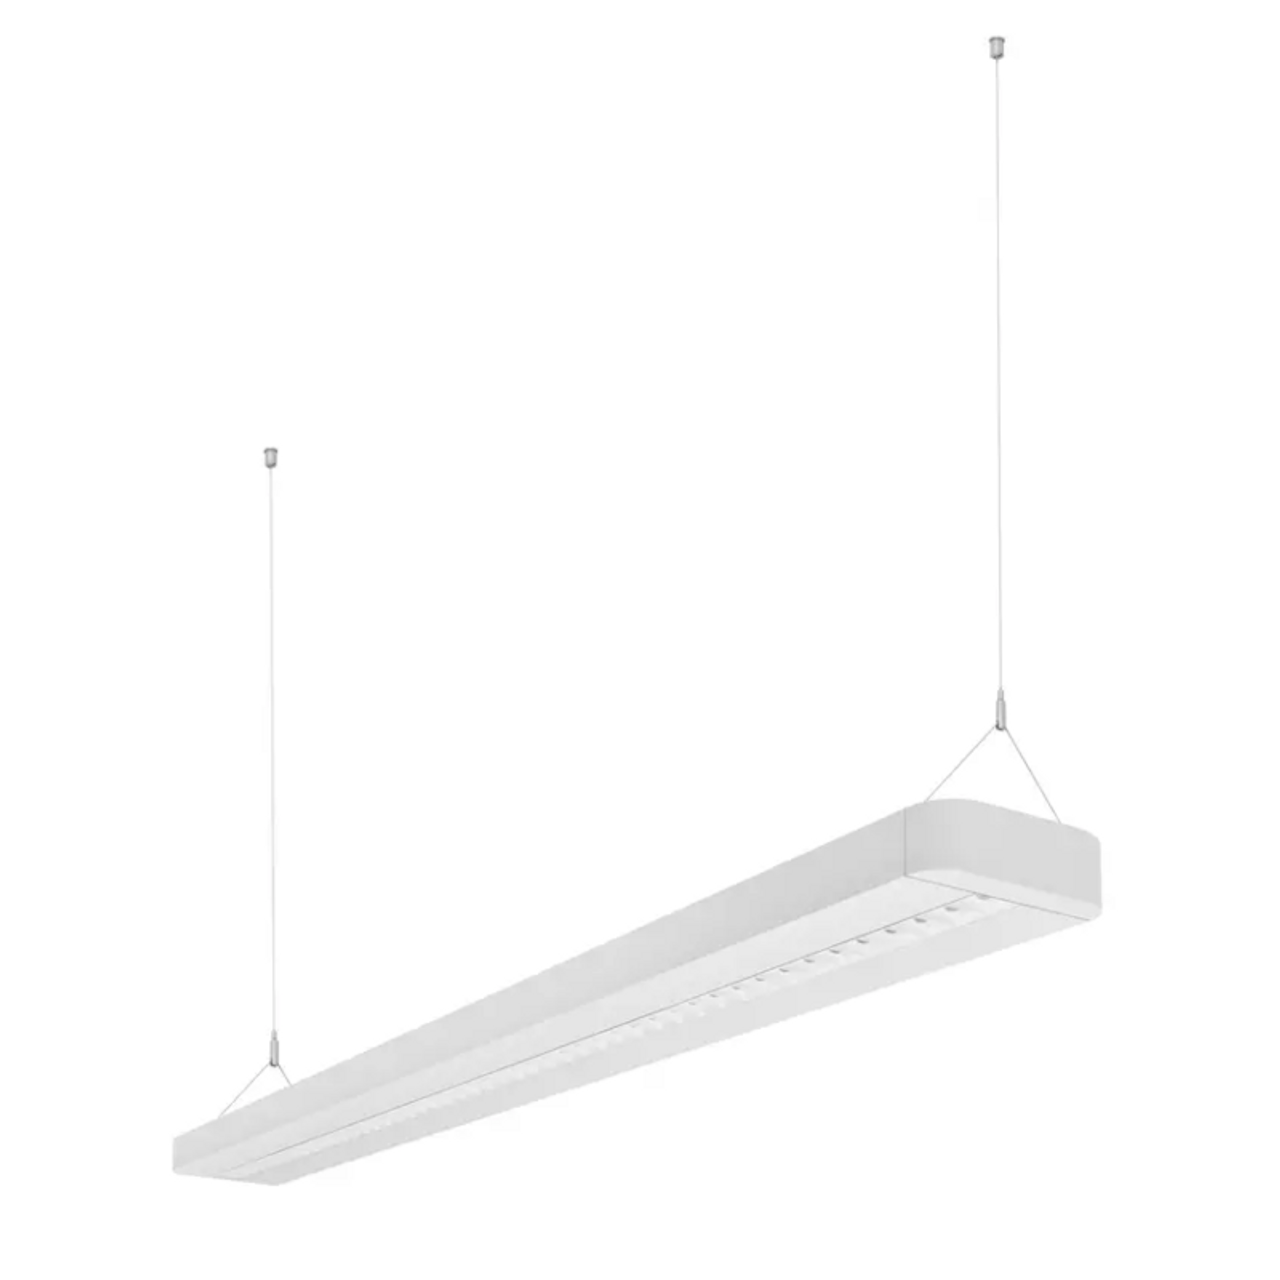 LED Linear Indiviled Direct/Indirect 1500mm 56W 6150lm 3000K White Emergency